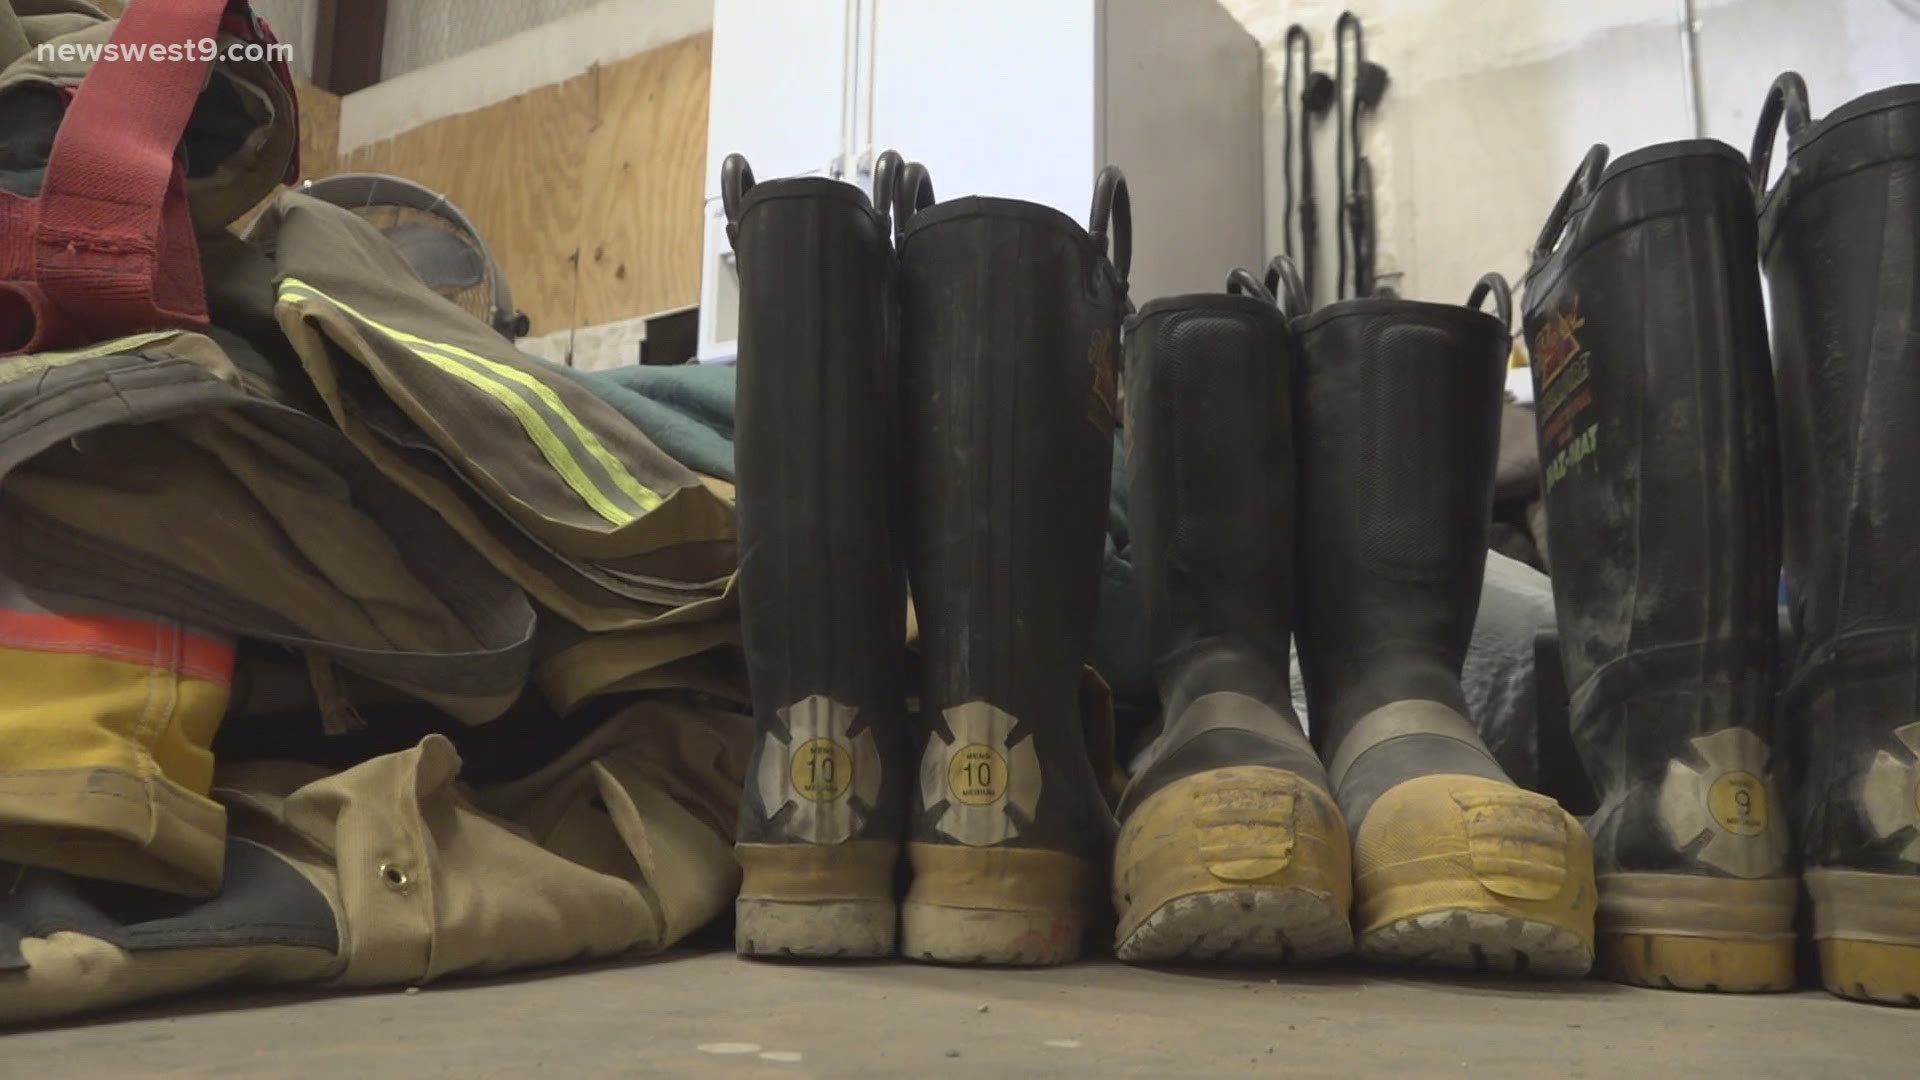 The volunteer firefighters at the Midland County Northeast Fire Department are raising money to get a new fire station, due to their current one being outdated.